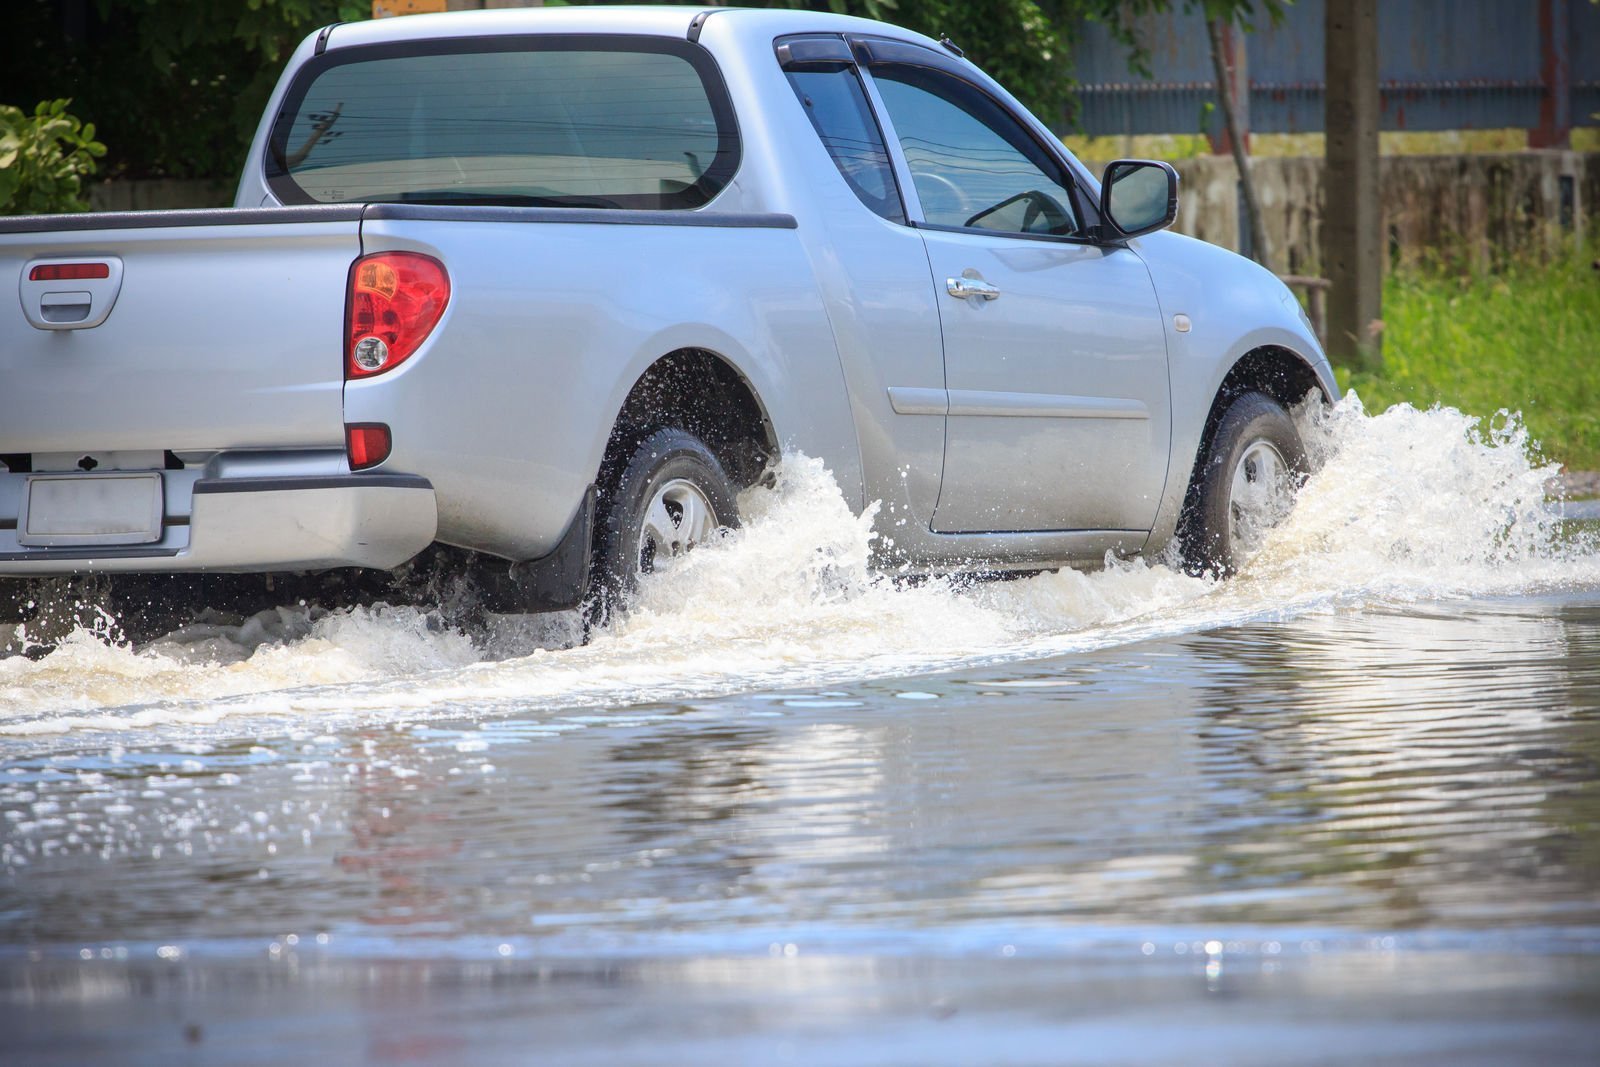 Does my car insurance cover flood damage?